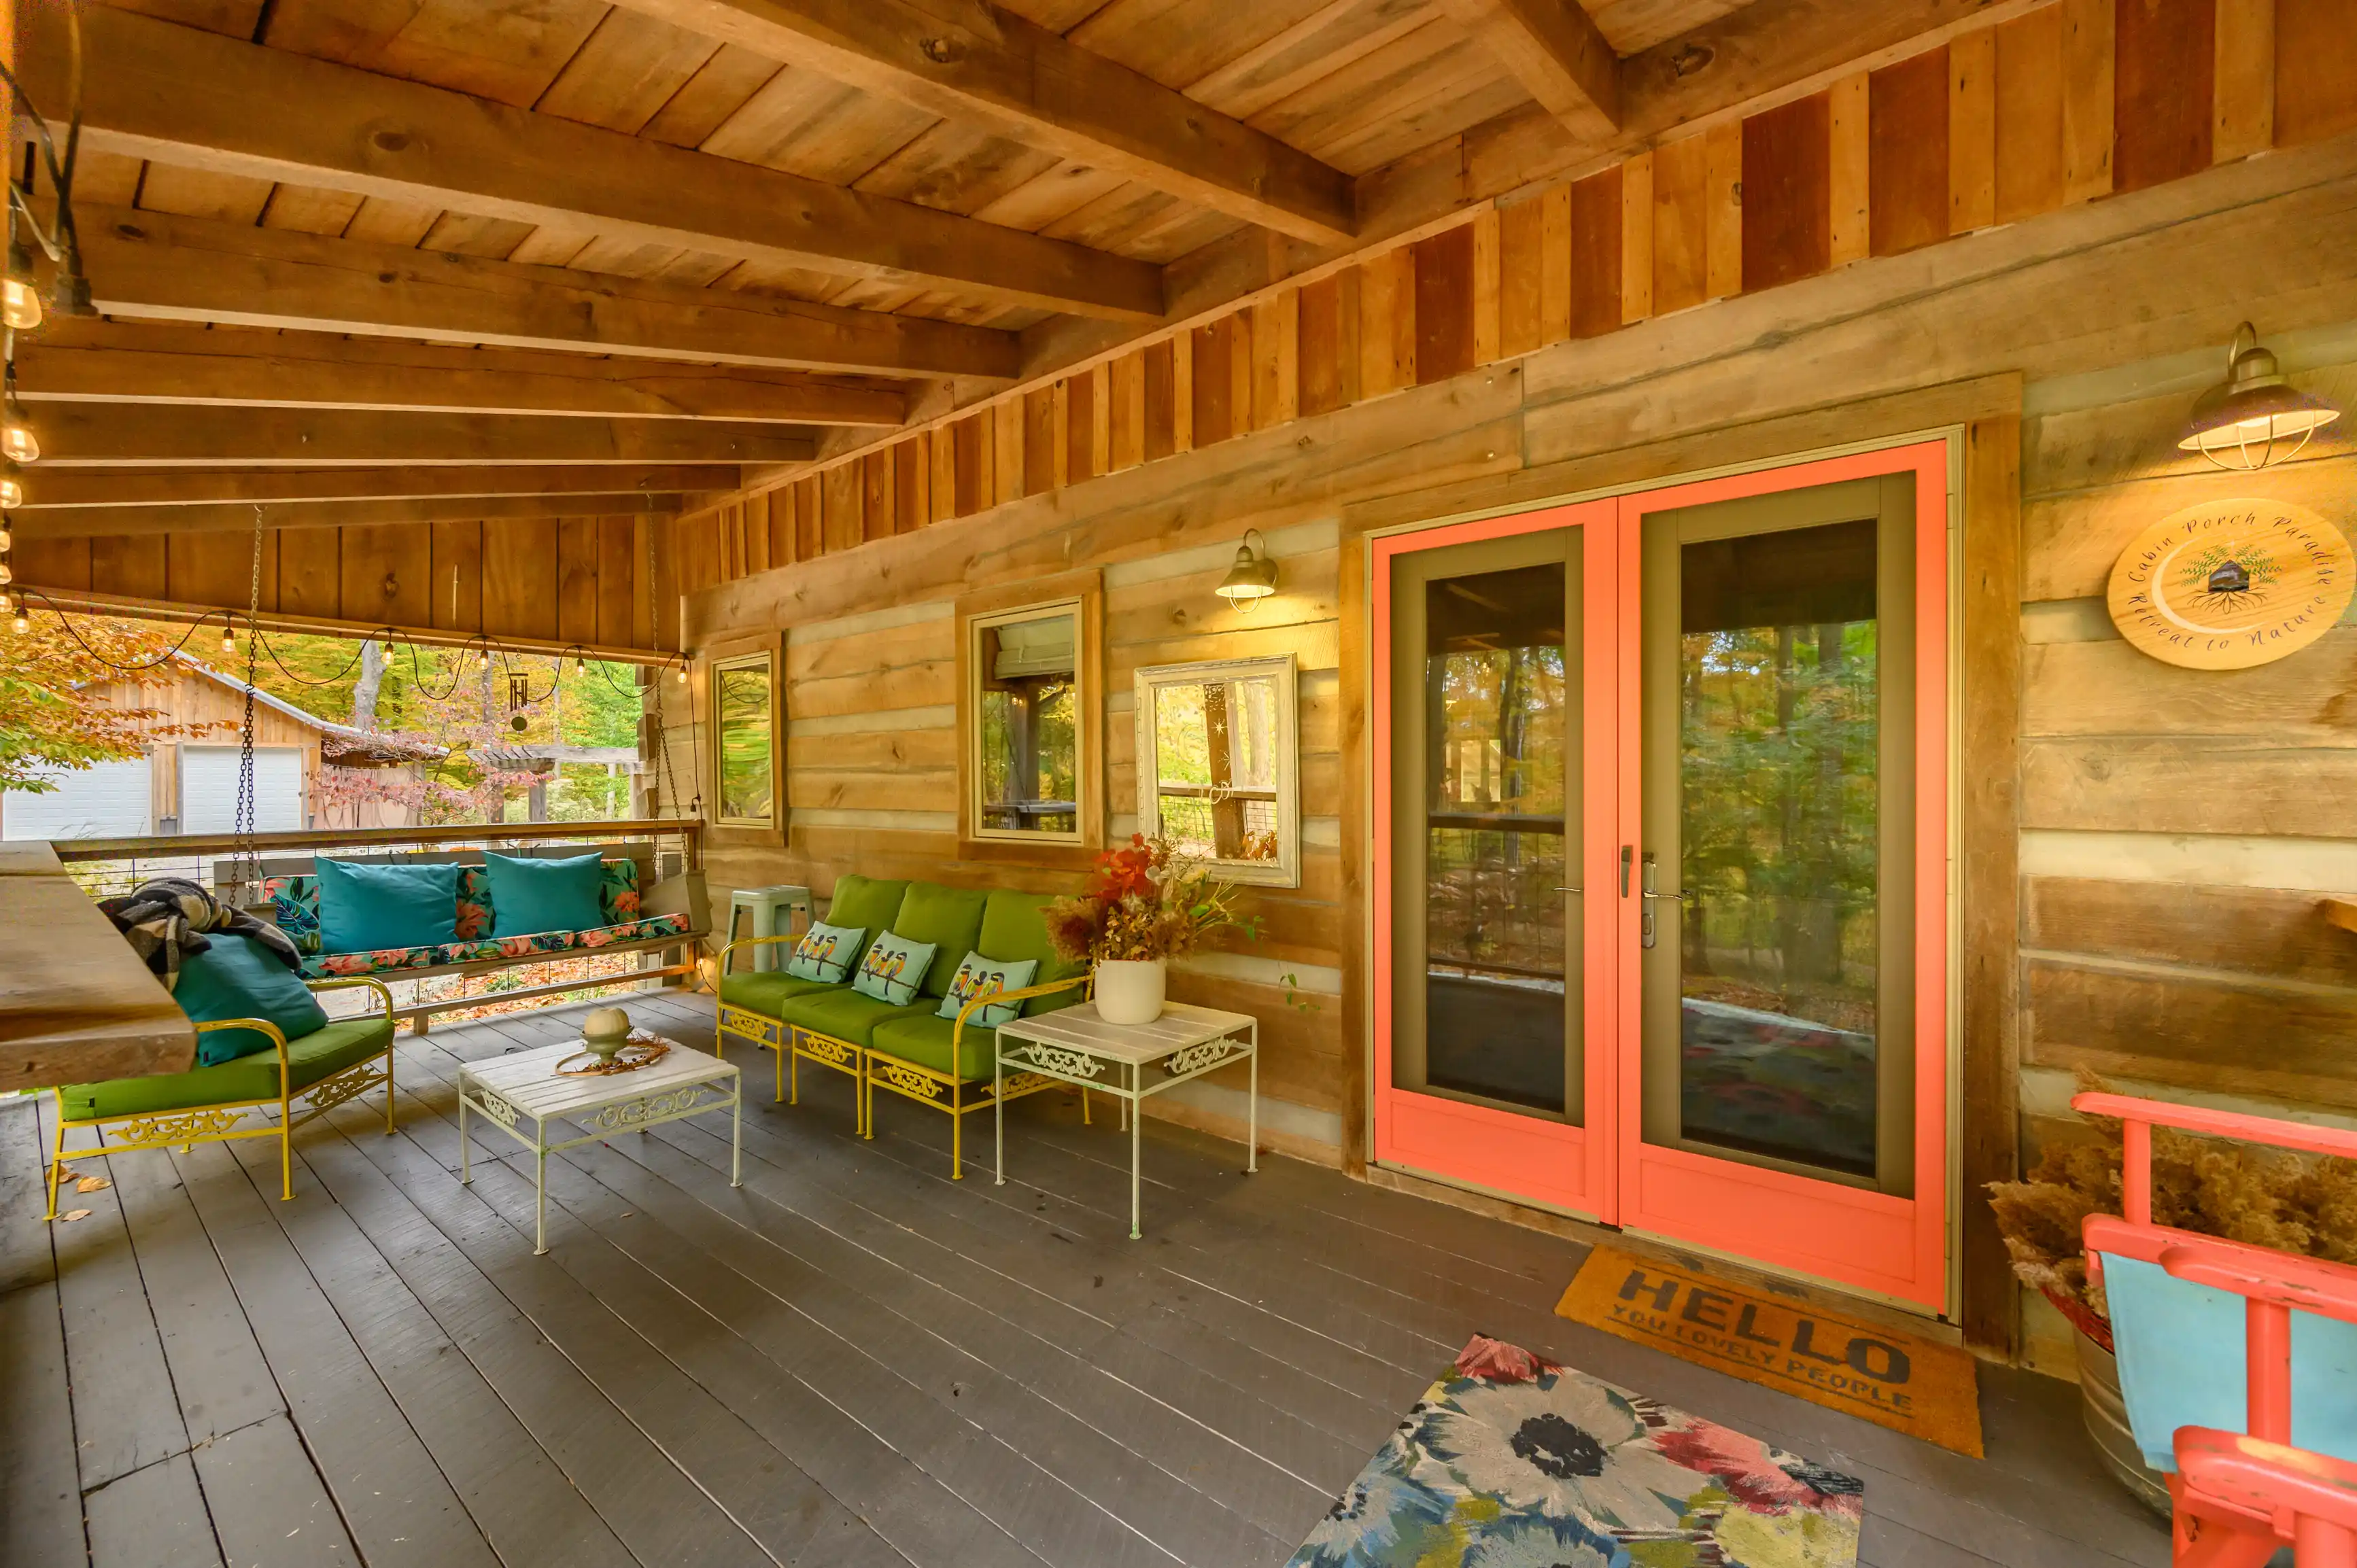 Cozy covered porch area of a log cabin with colorful furniture, a "HELLO" doormat, and warm lighting.